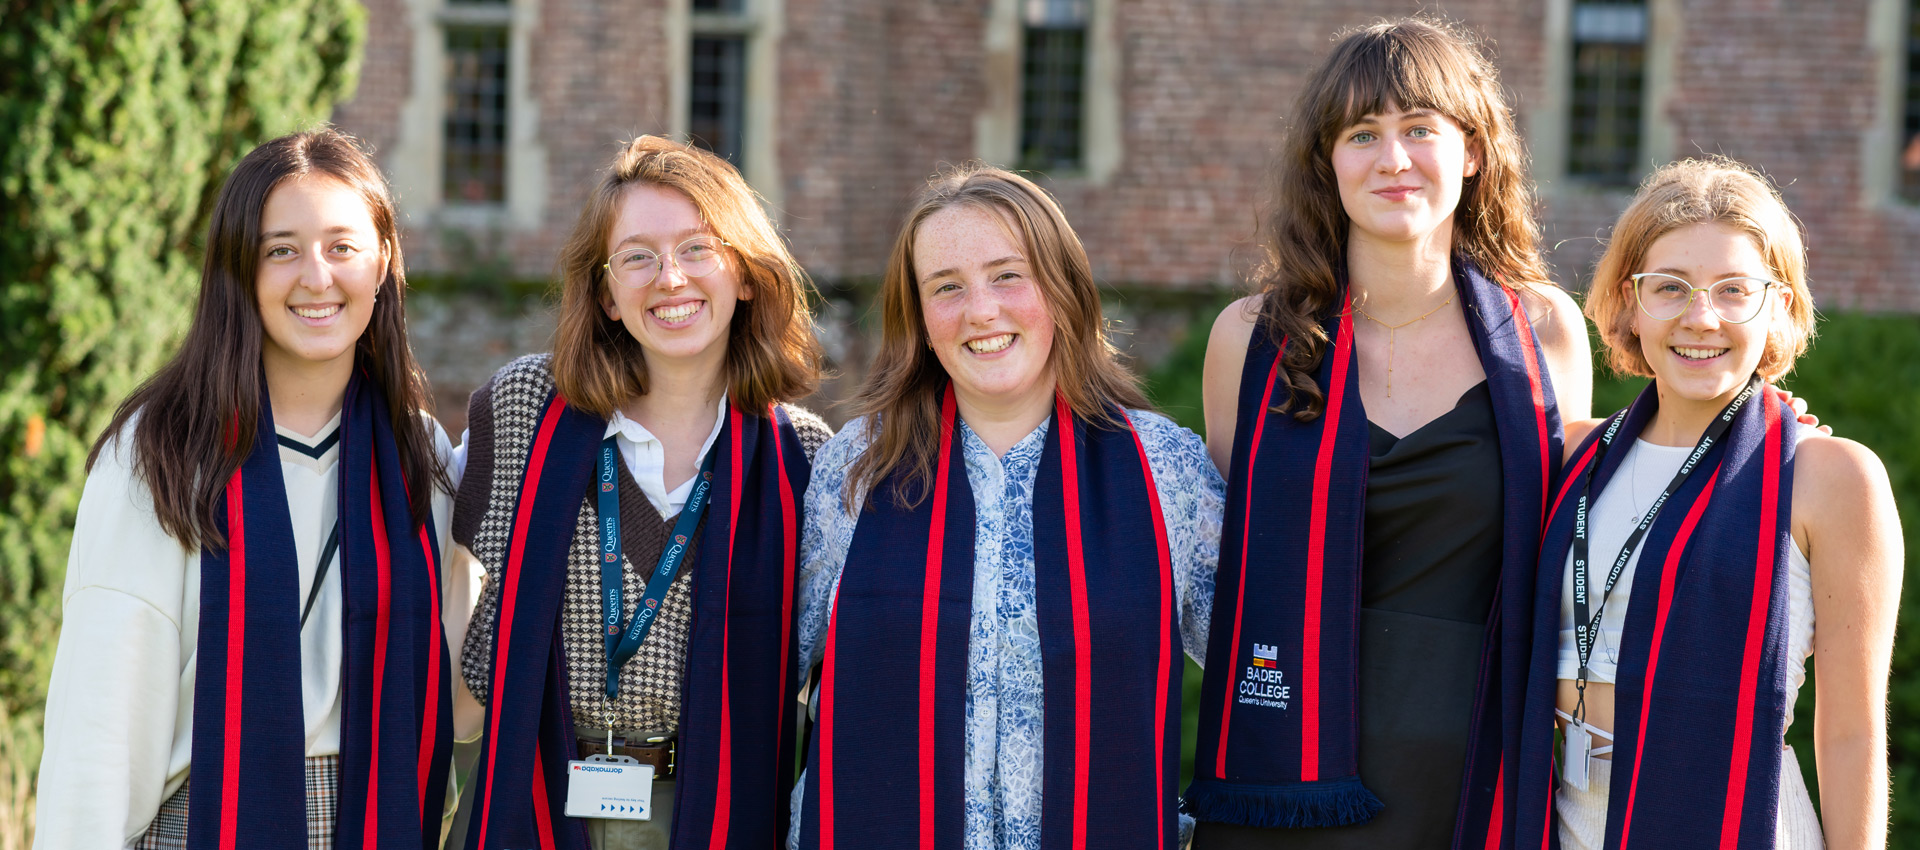 Students pose with their Bader College scarves